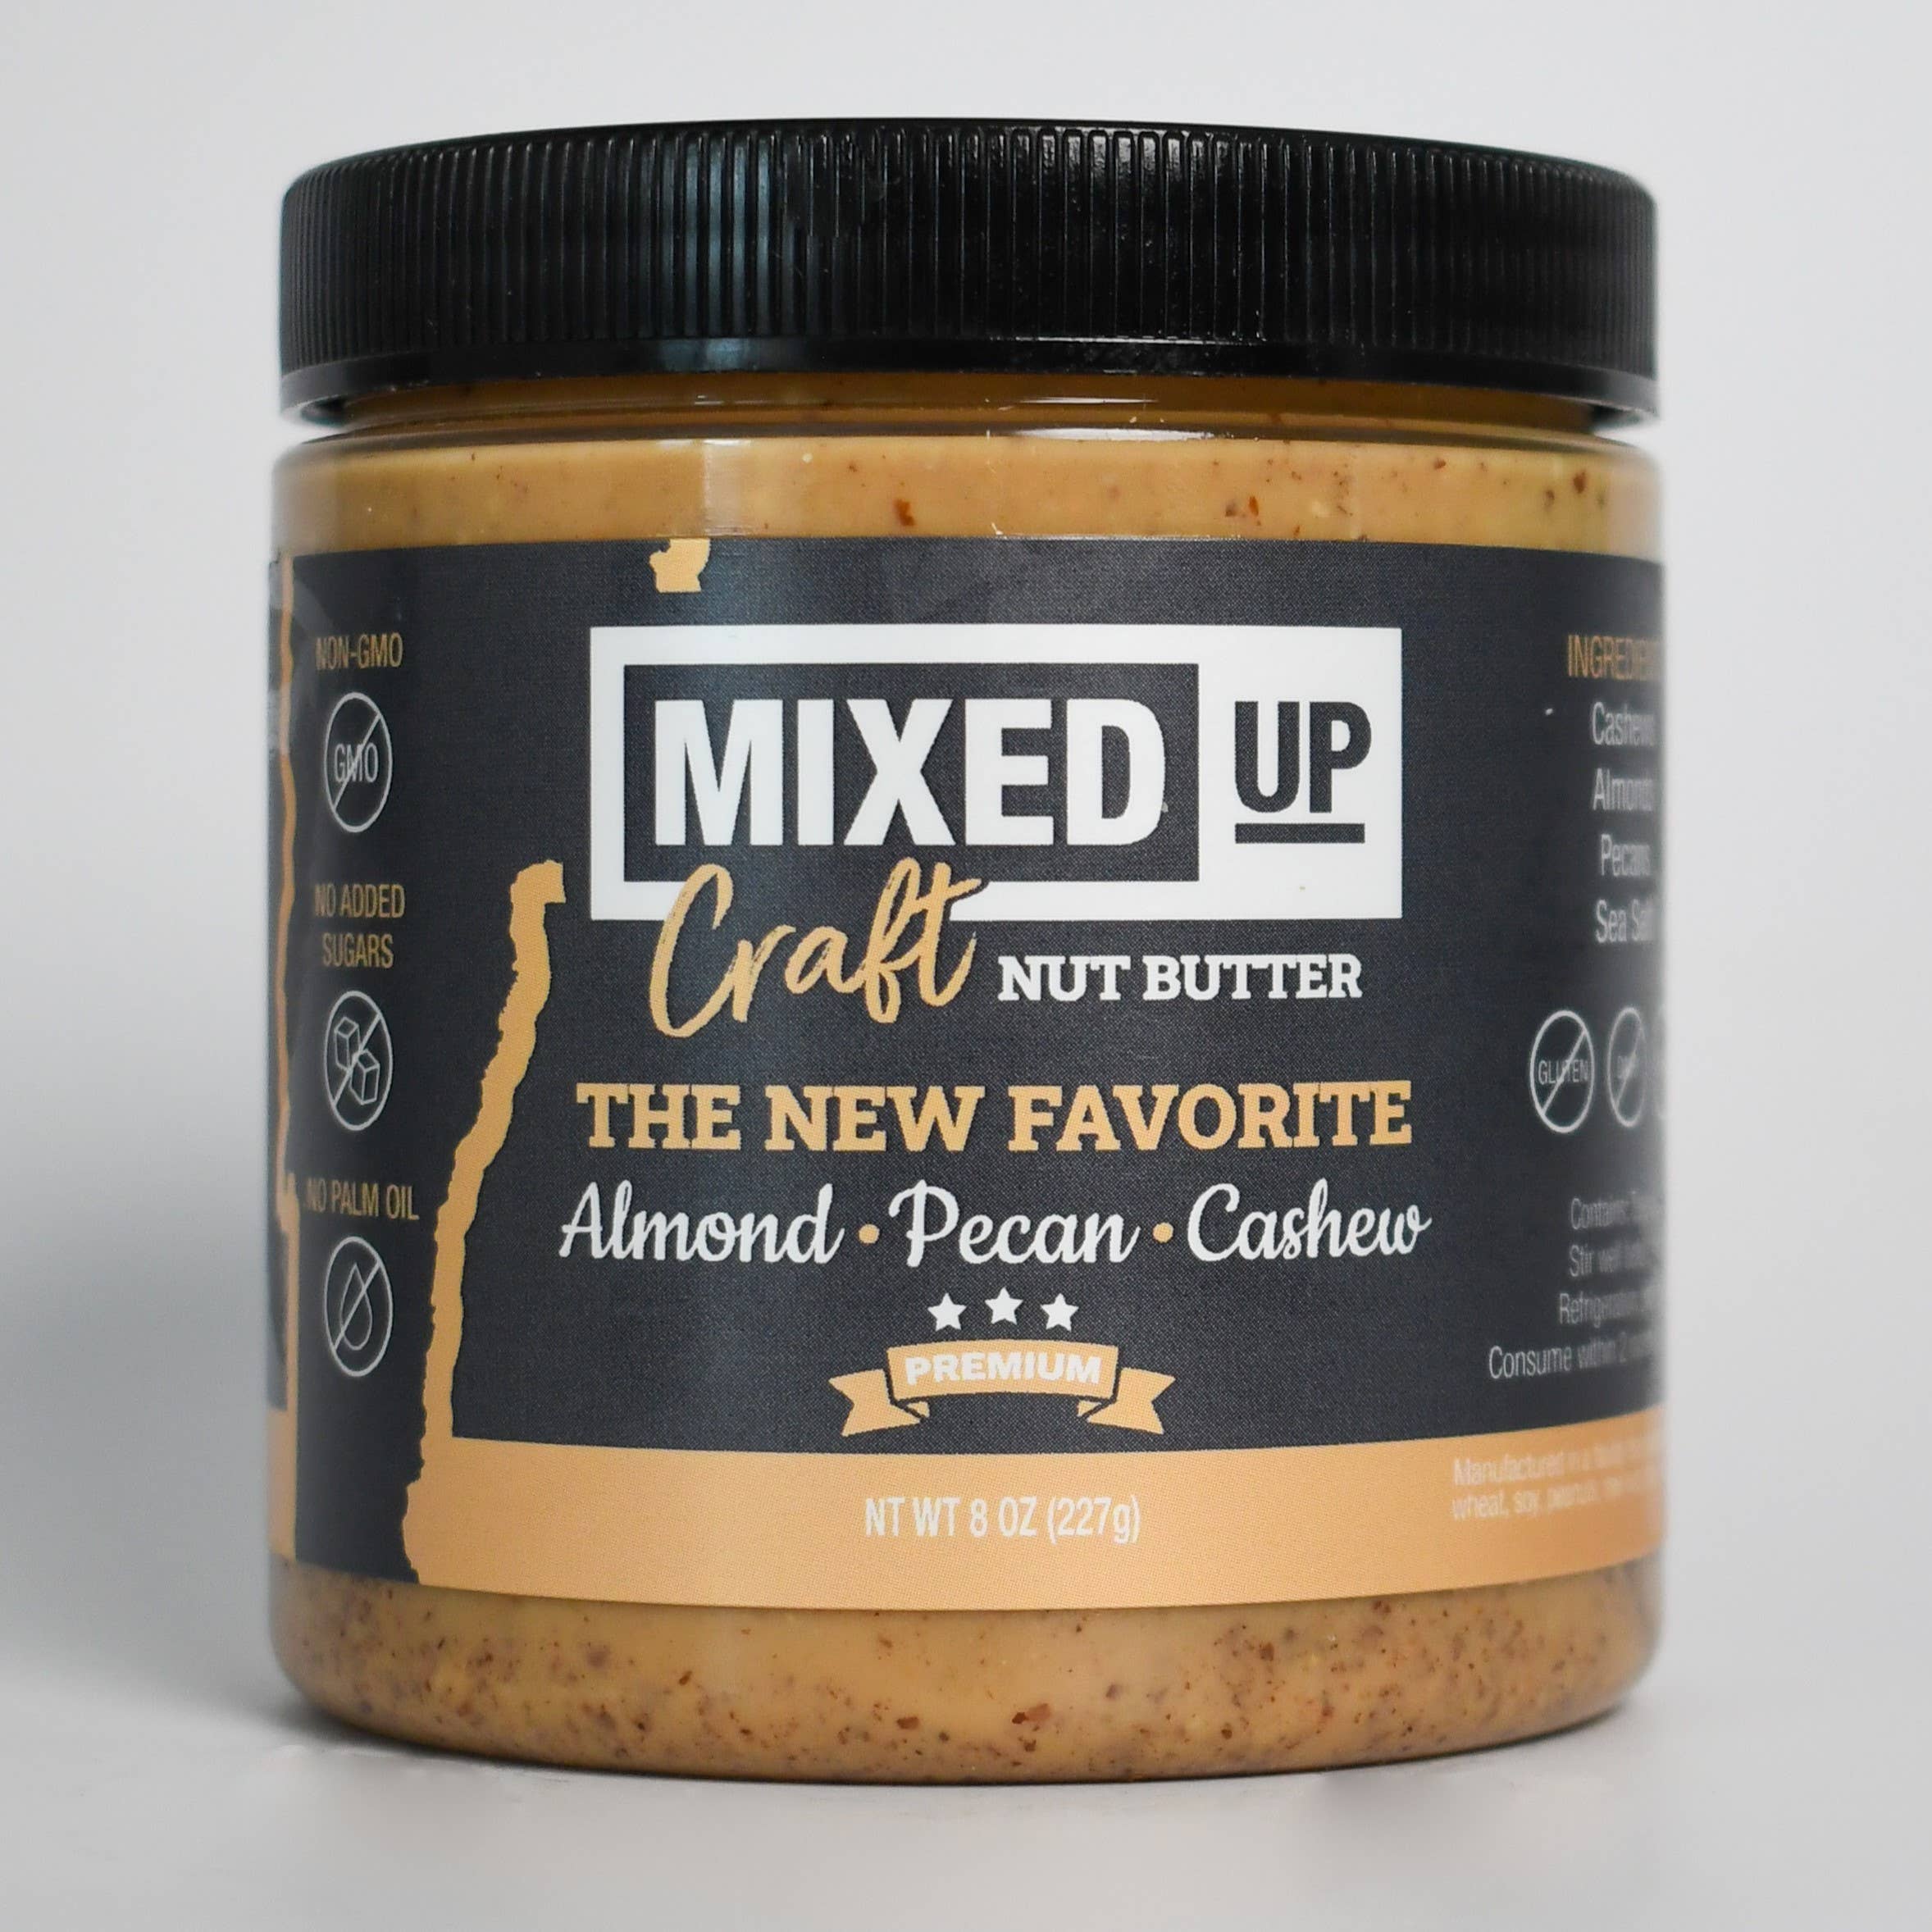 Mixed Up Foods - THE NEW FAVORITE - Almond, Pecan, & Cashew Nut Butter